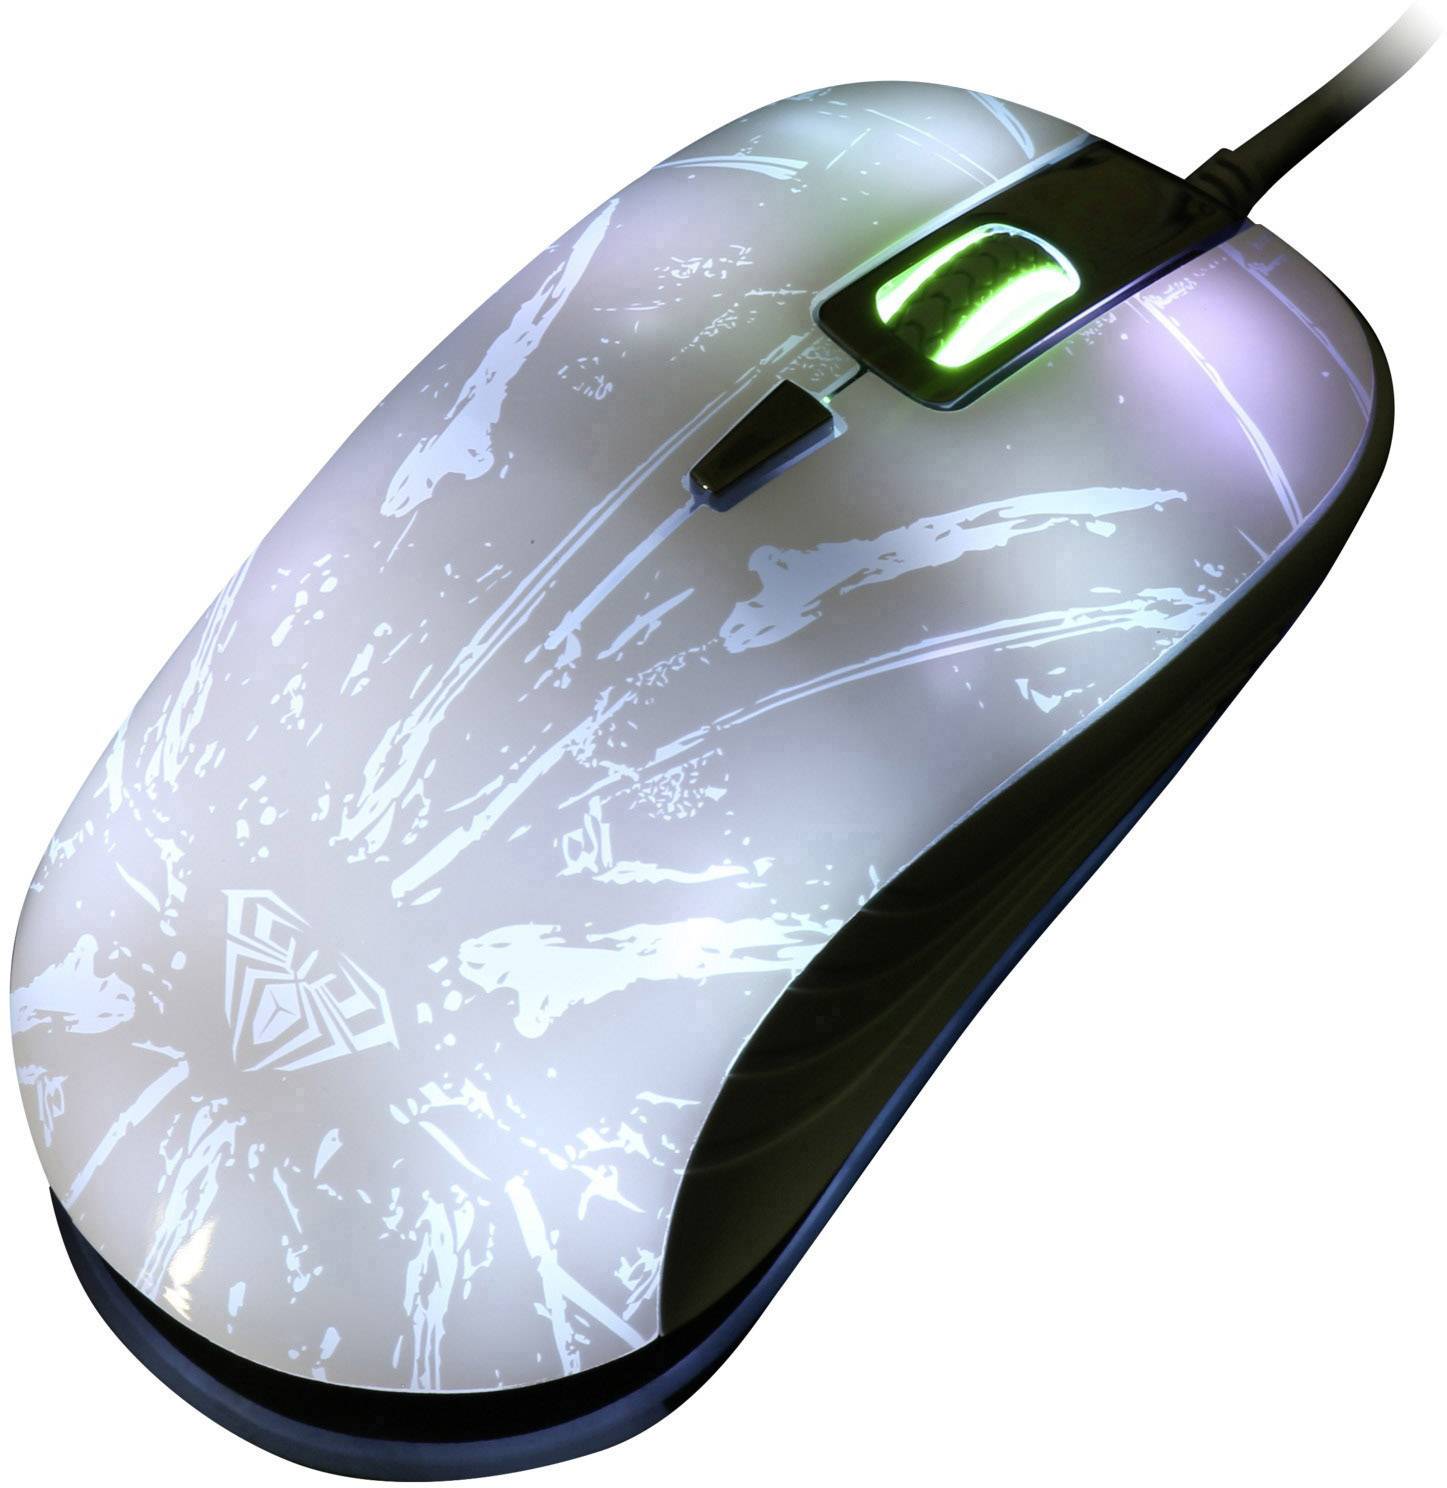 aula gaming mouse driver